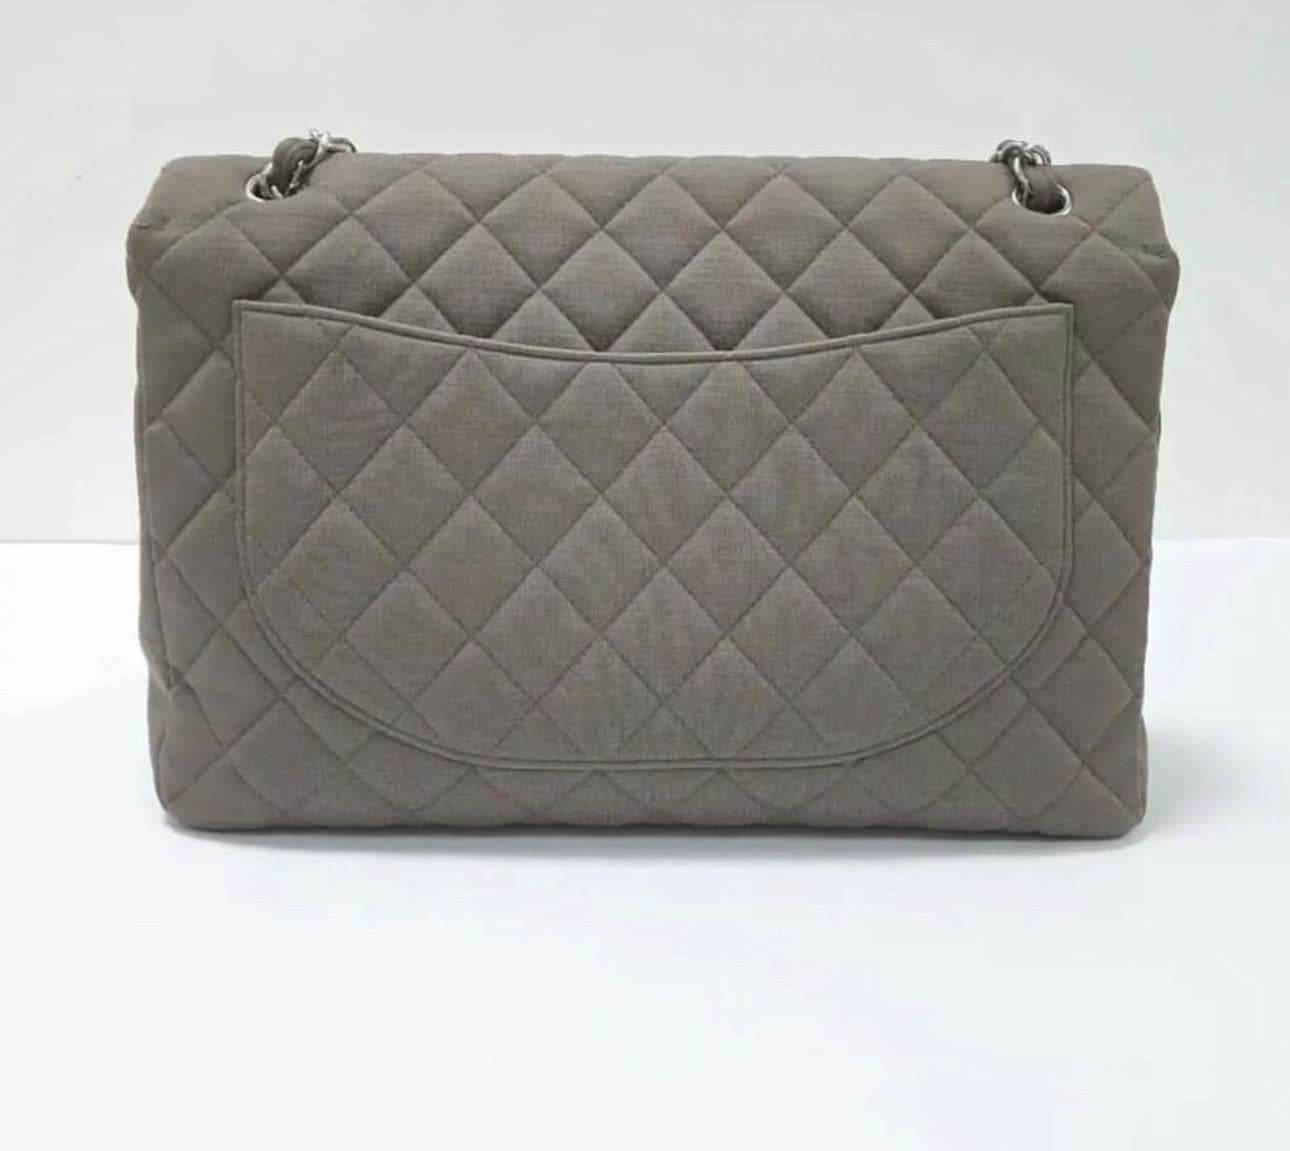 Chanel Timeless Maxi Jumbo lined flap handbag in gray textile.
Silver hardware, a chain strap in silver metal interlaced with gray caviar leather for hand and shoulder carry
Silver CC logo clasp
lined flap
Gray leather lining, 1 lined patch pocket,